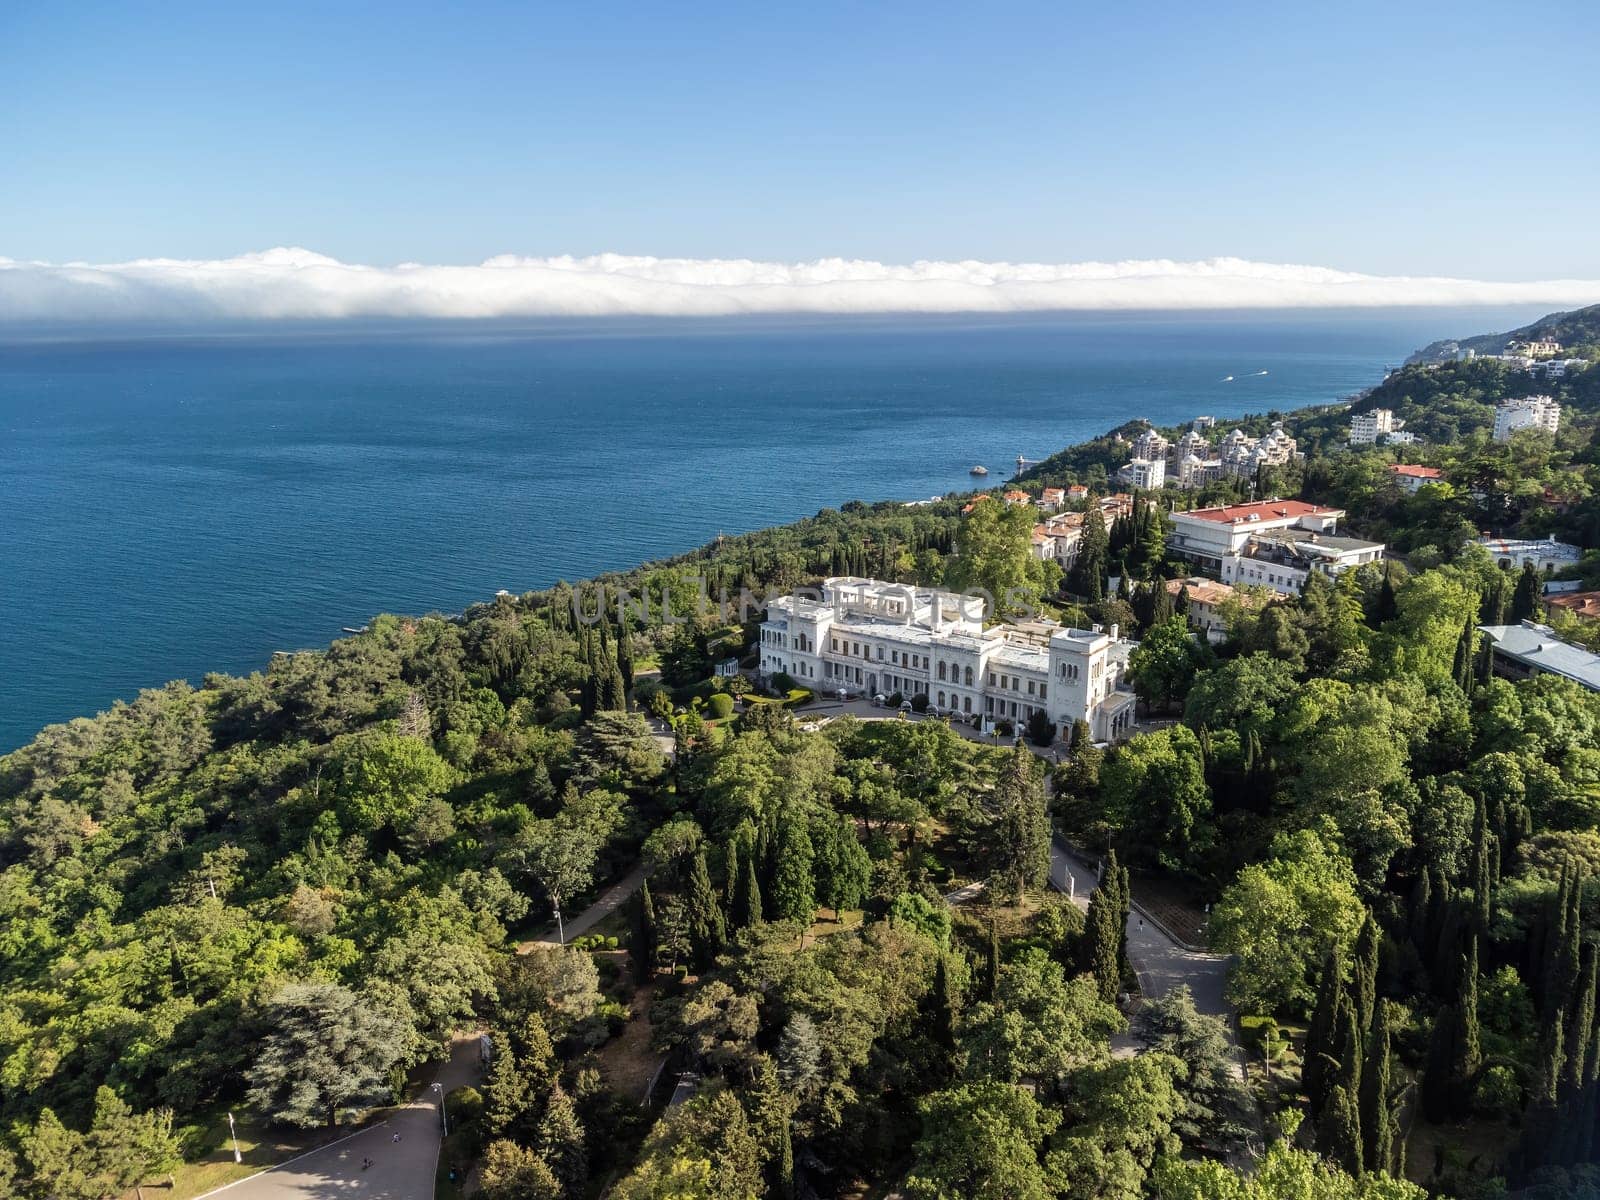 Aerial View of Livadia Palace - located on the shores of the Black Sea in the village of Livadia in the Yalta region of Crimea. Livadia Palace was a summer retreat of the last Russian tsar Nicholas II by panophotograph